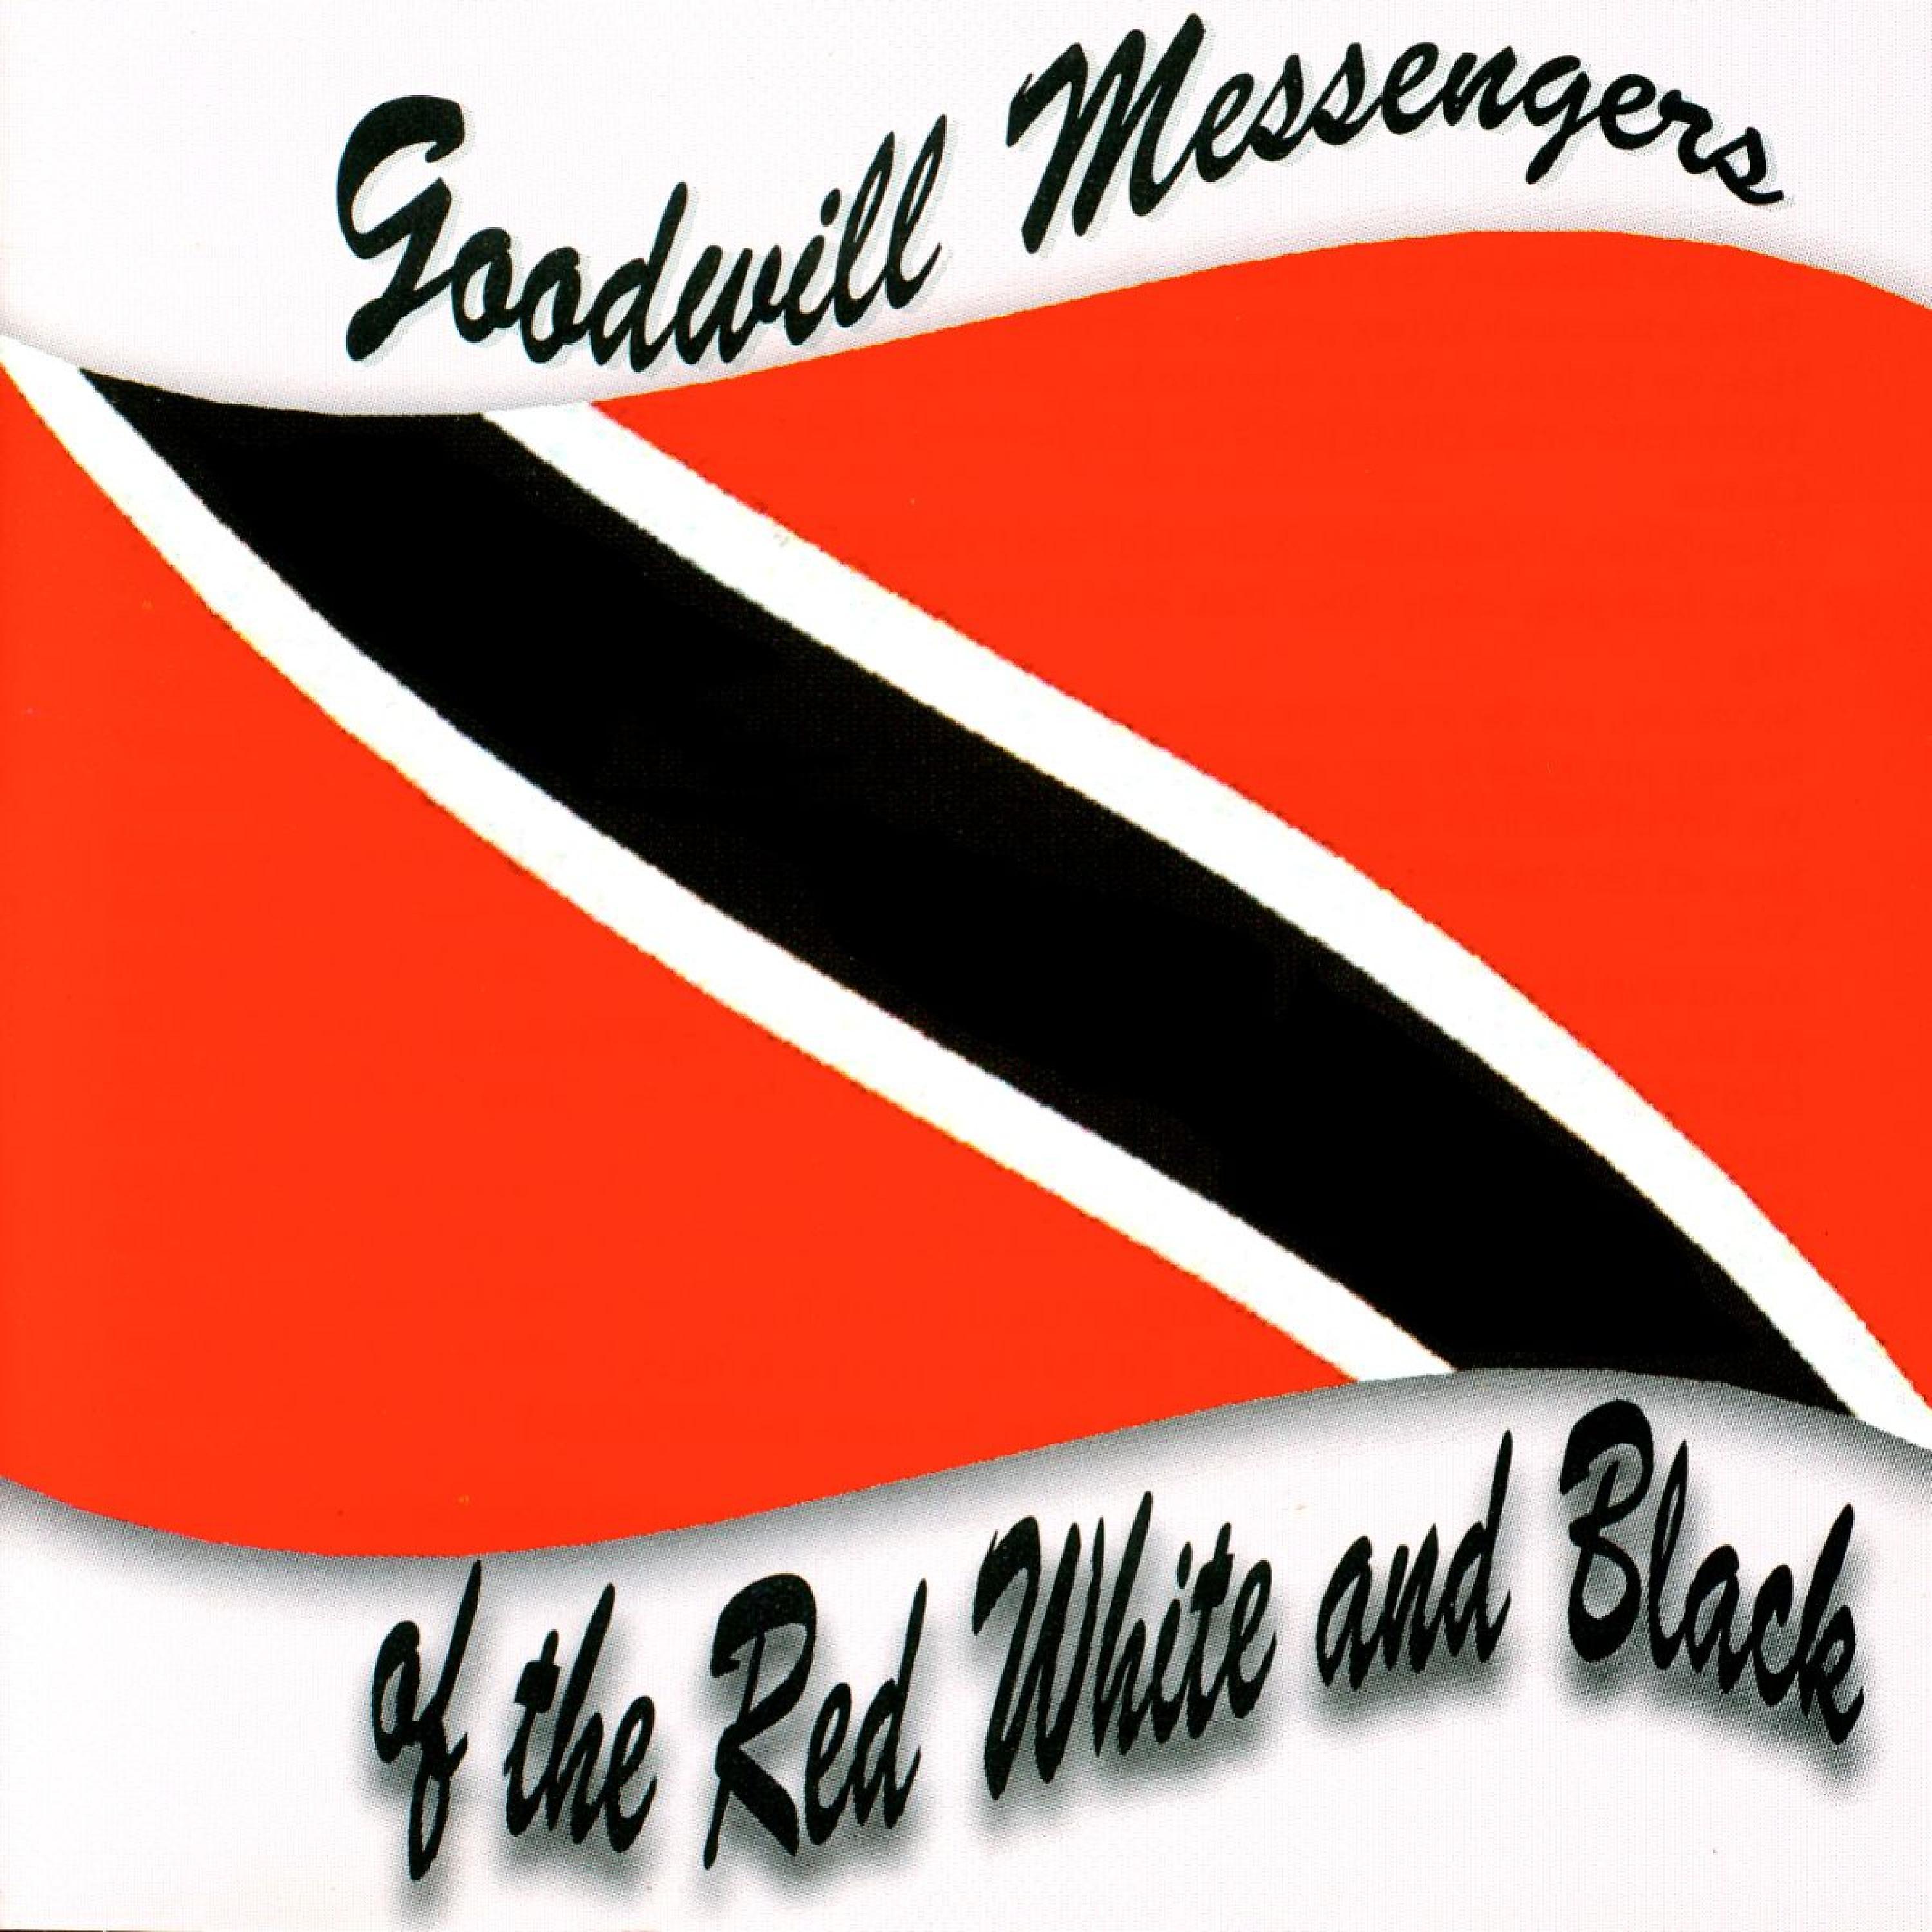 Постер альбома Goodwill Messengers of the Red White and Black